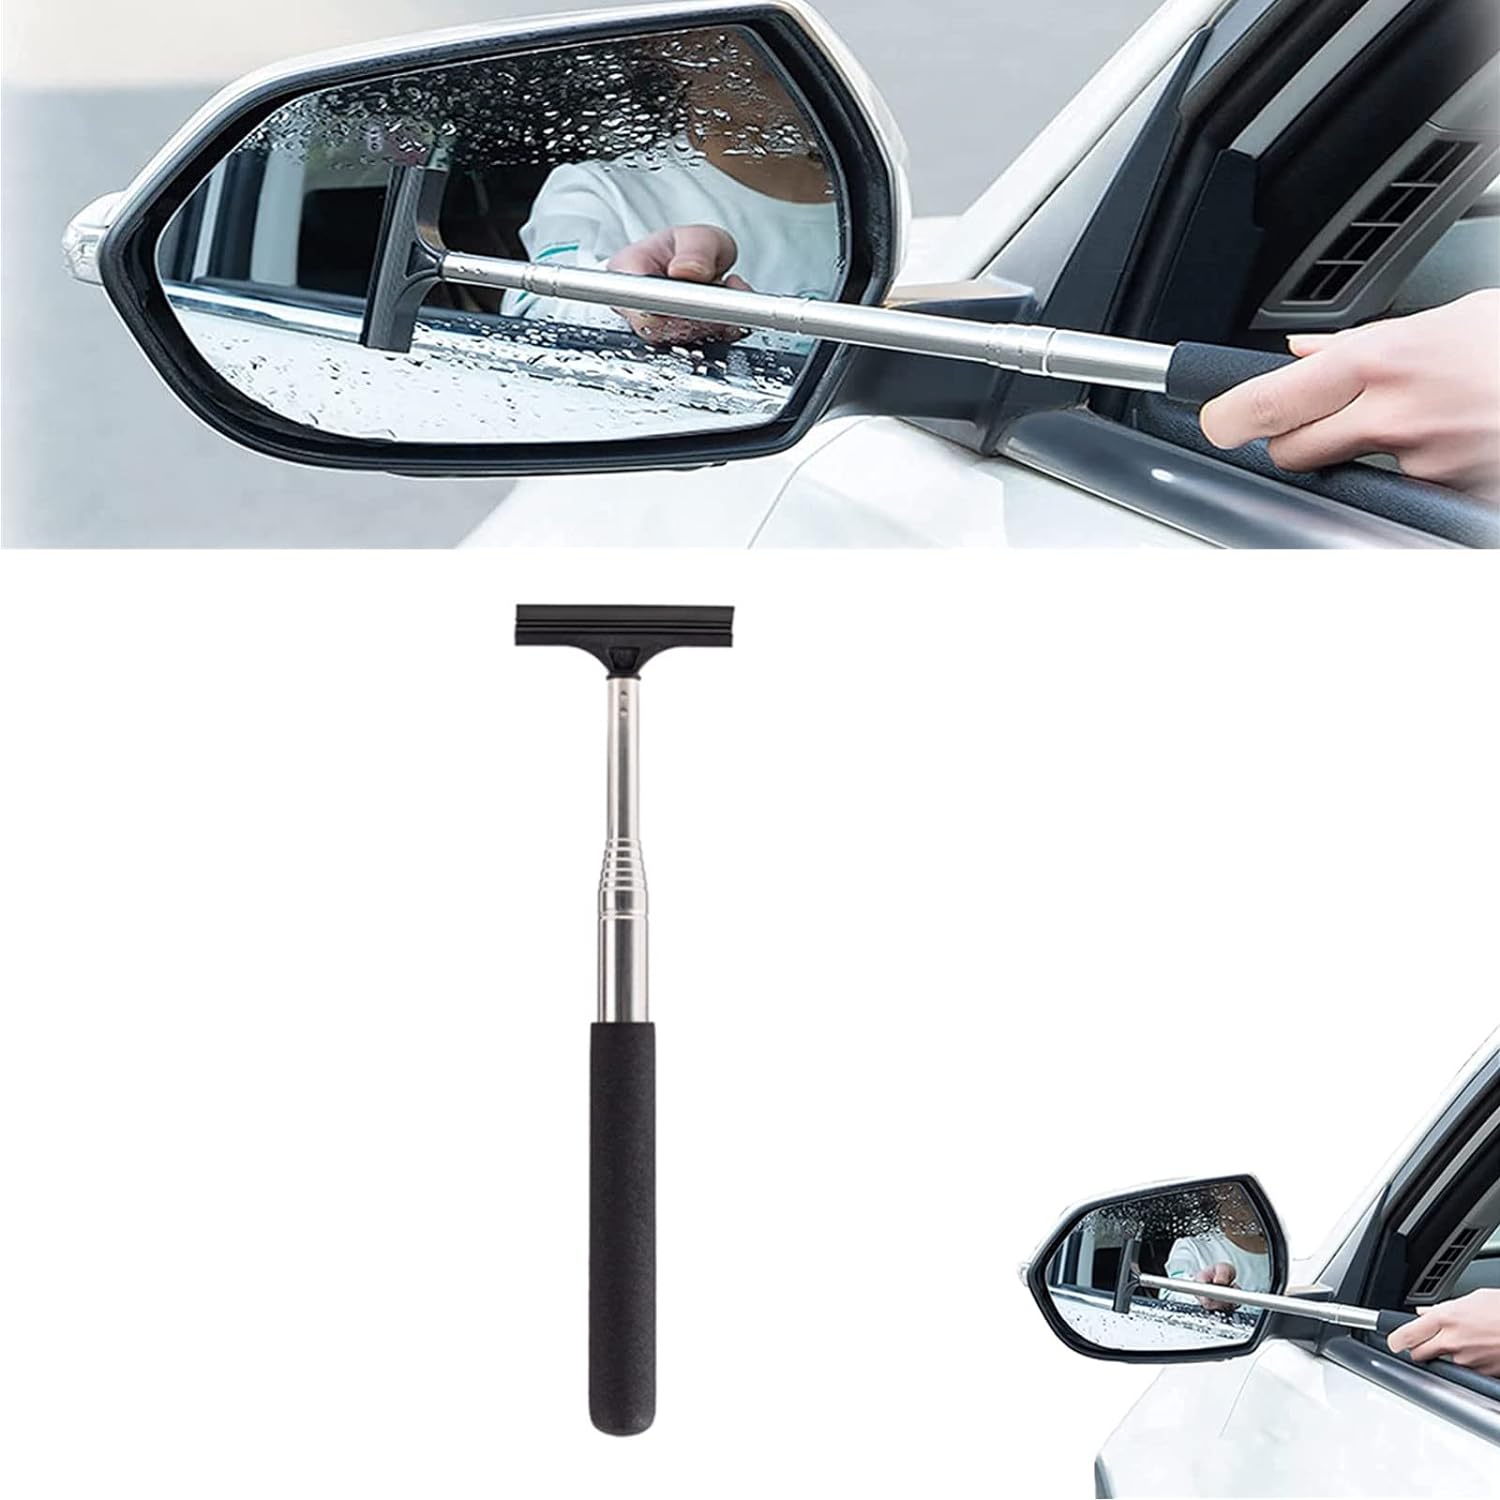 AWMSKONG Retractable Rear-View Mirror Wiper Snow Brush and Ice Scraper,Car Snow Scraper and Brush Shovel,Extendable Snow Brush with Sque